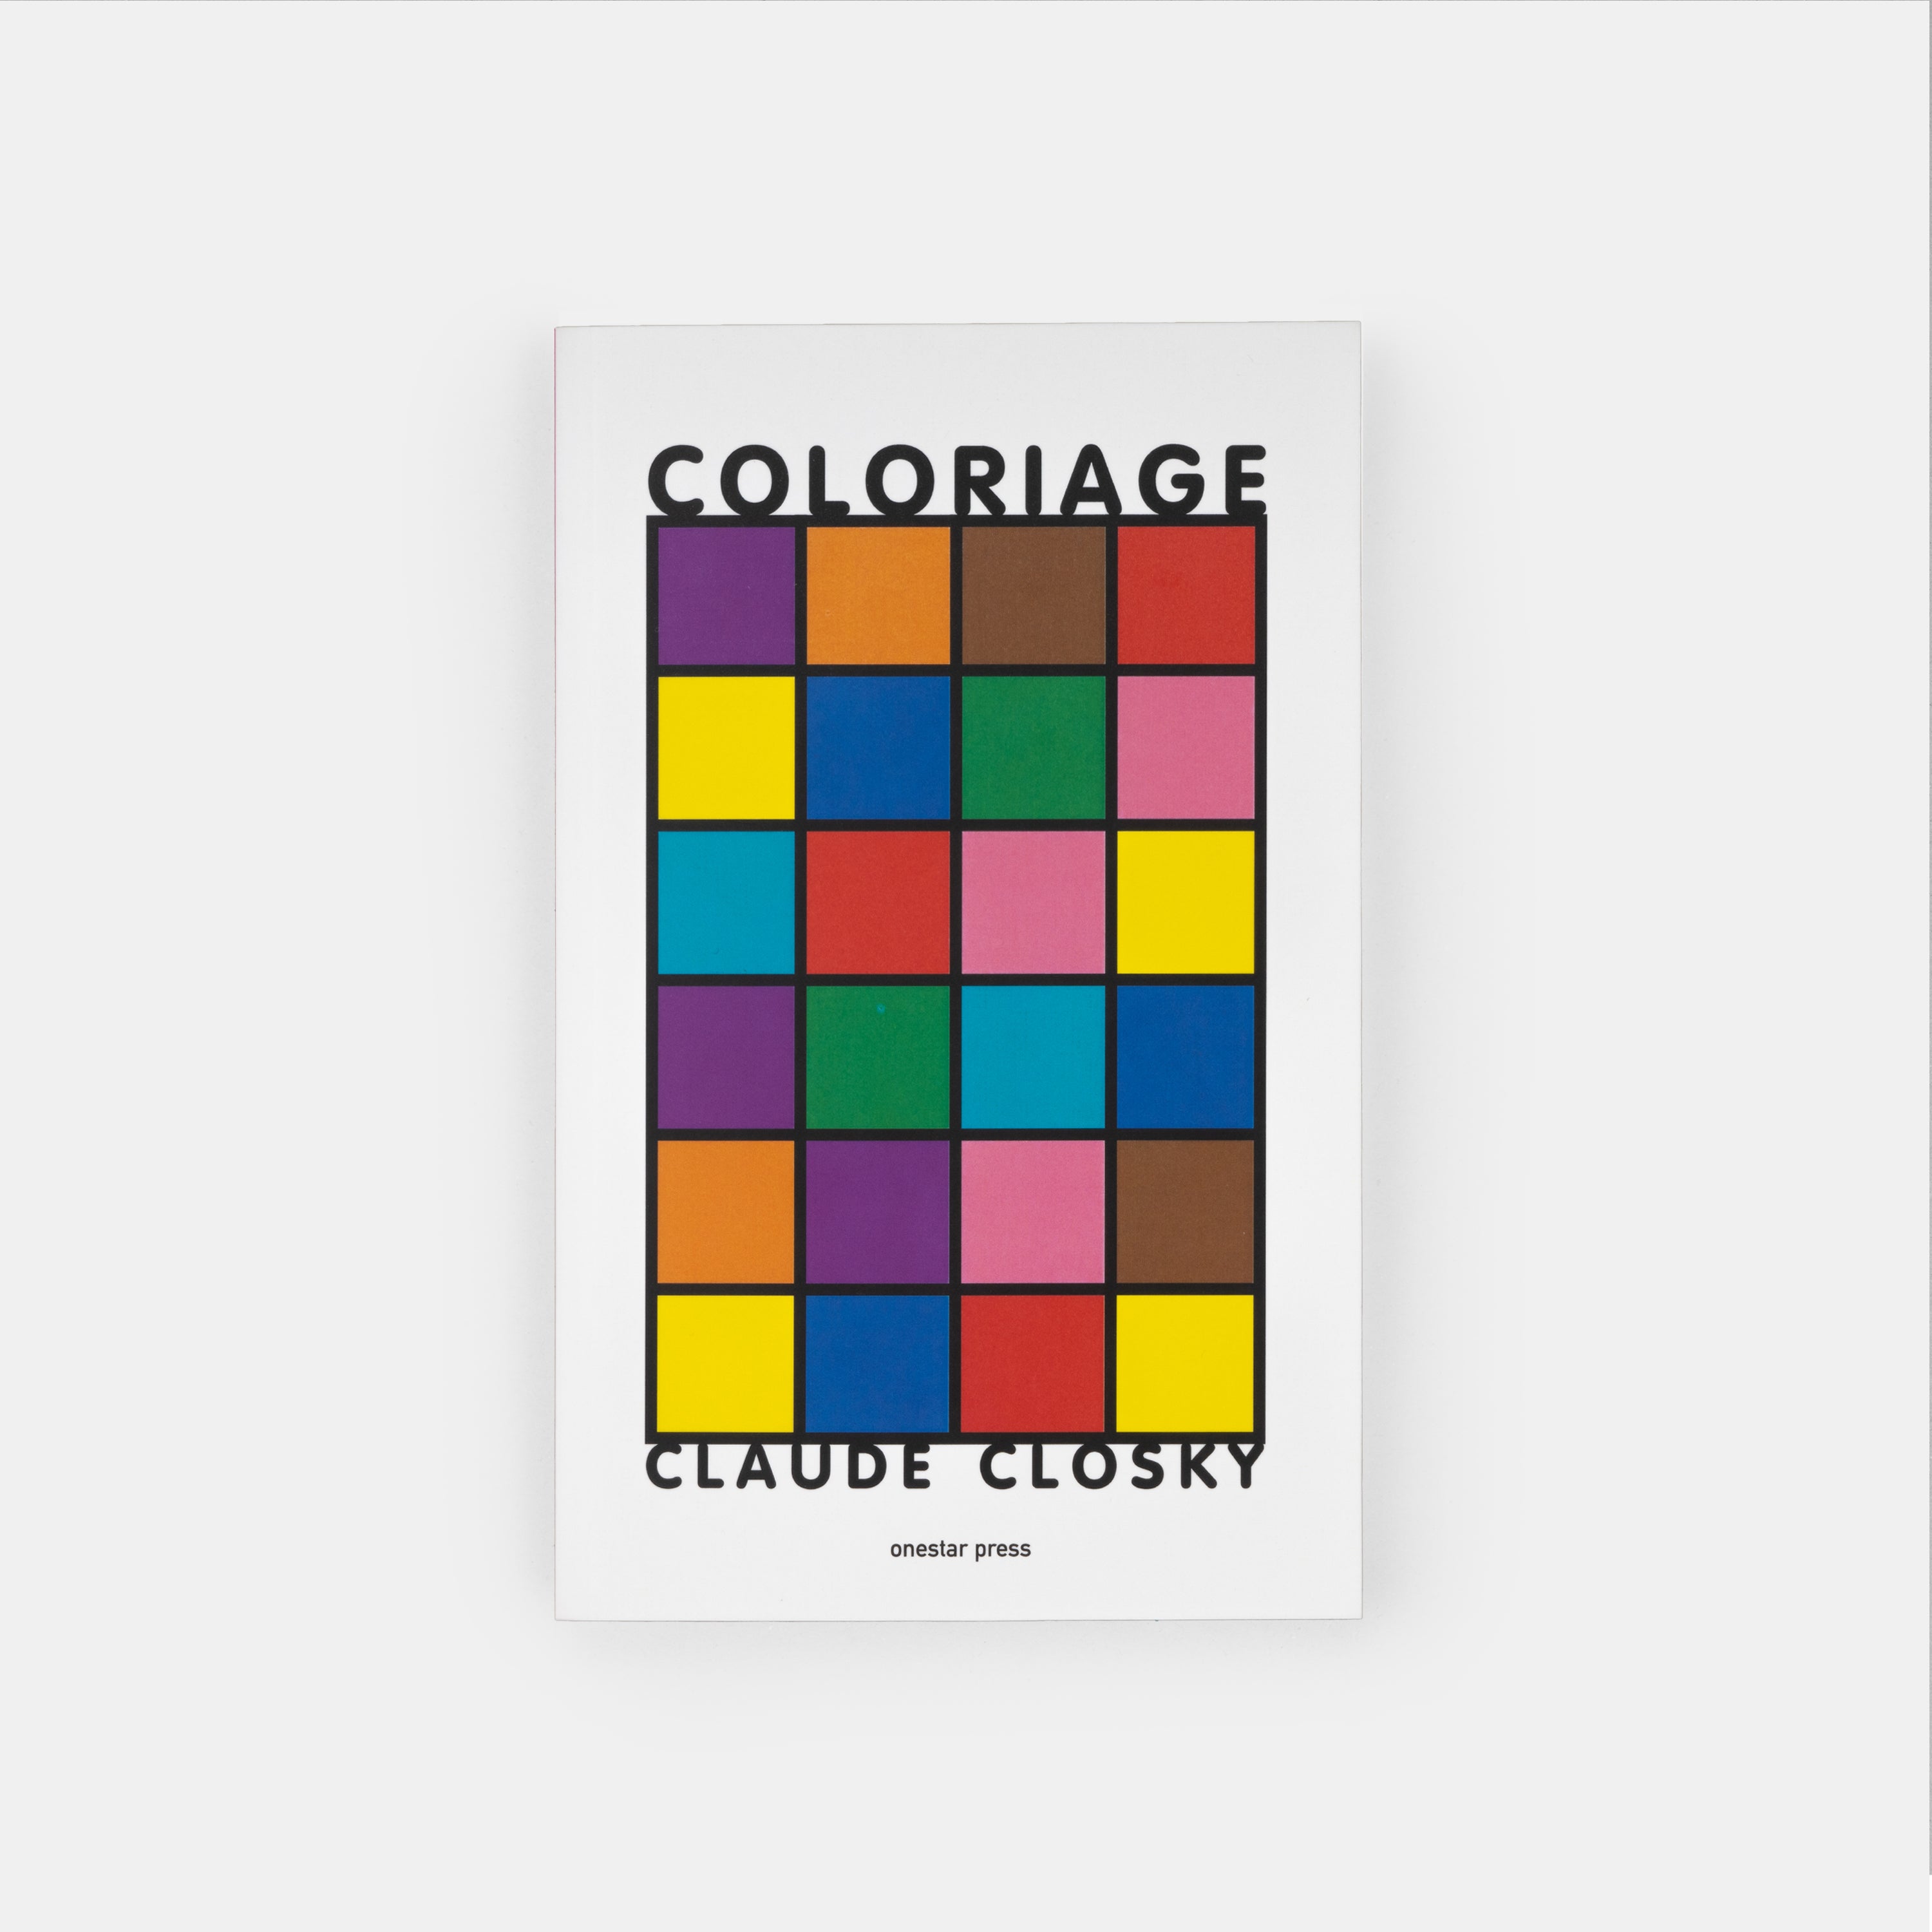 Untitled (Coloriage) by Claude Closky second image